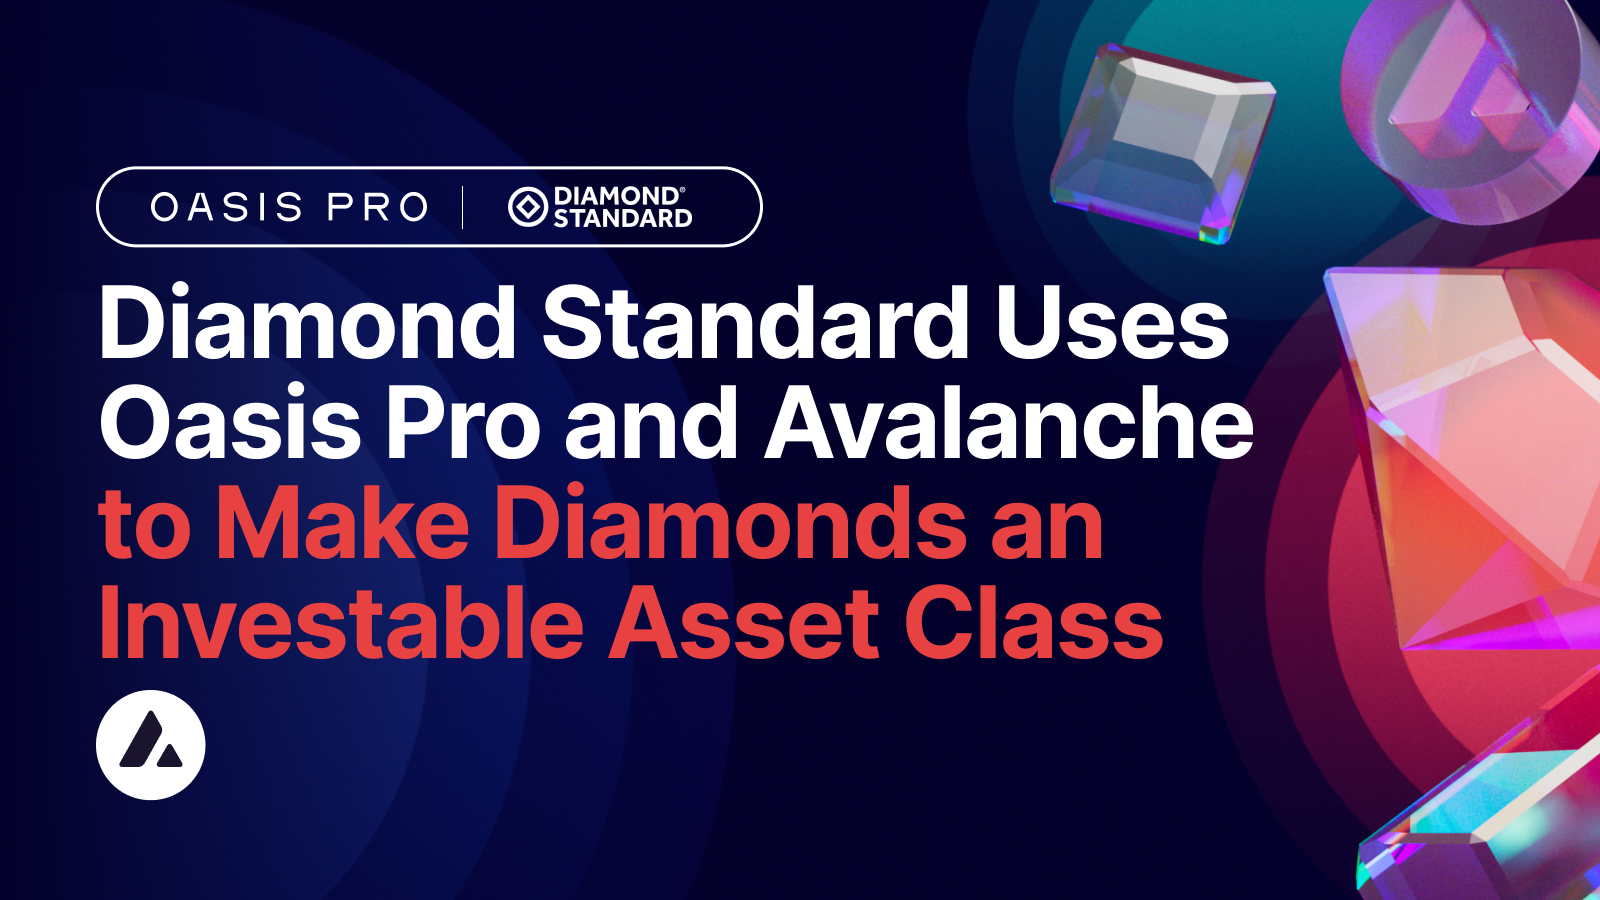 Diamond Standard Leverages Oasis Pro and Avalanche to Make Diamonds an Investable Asset Class